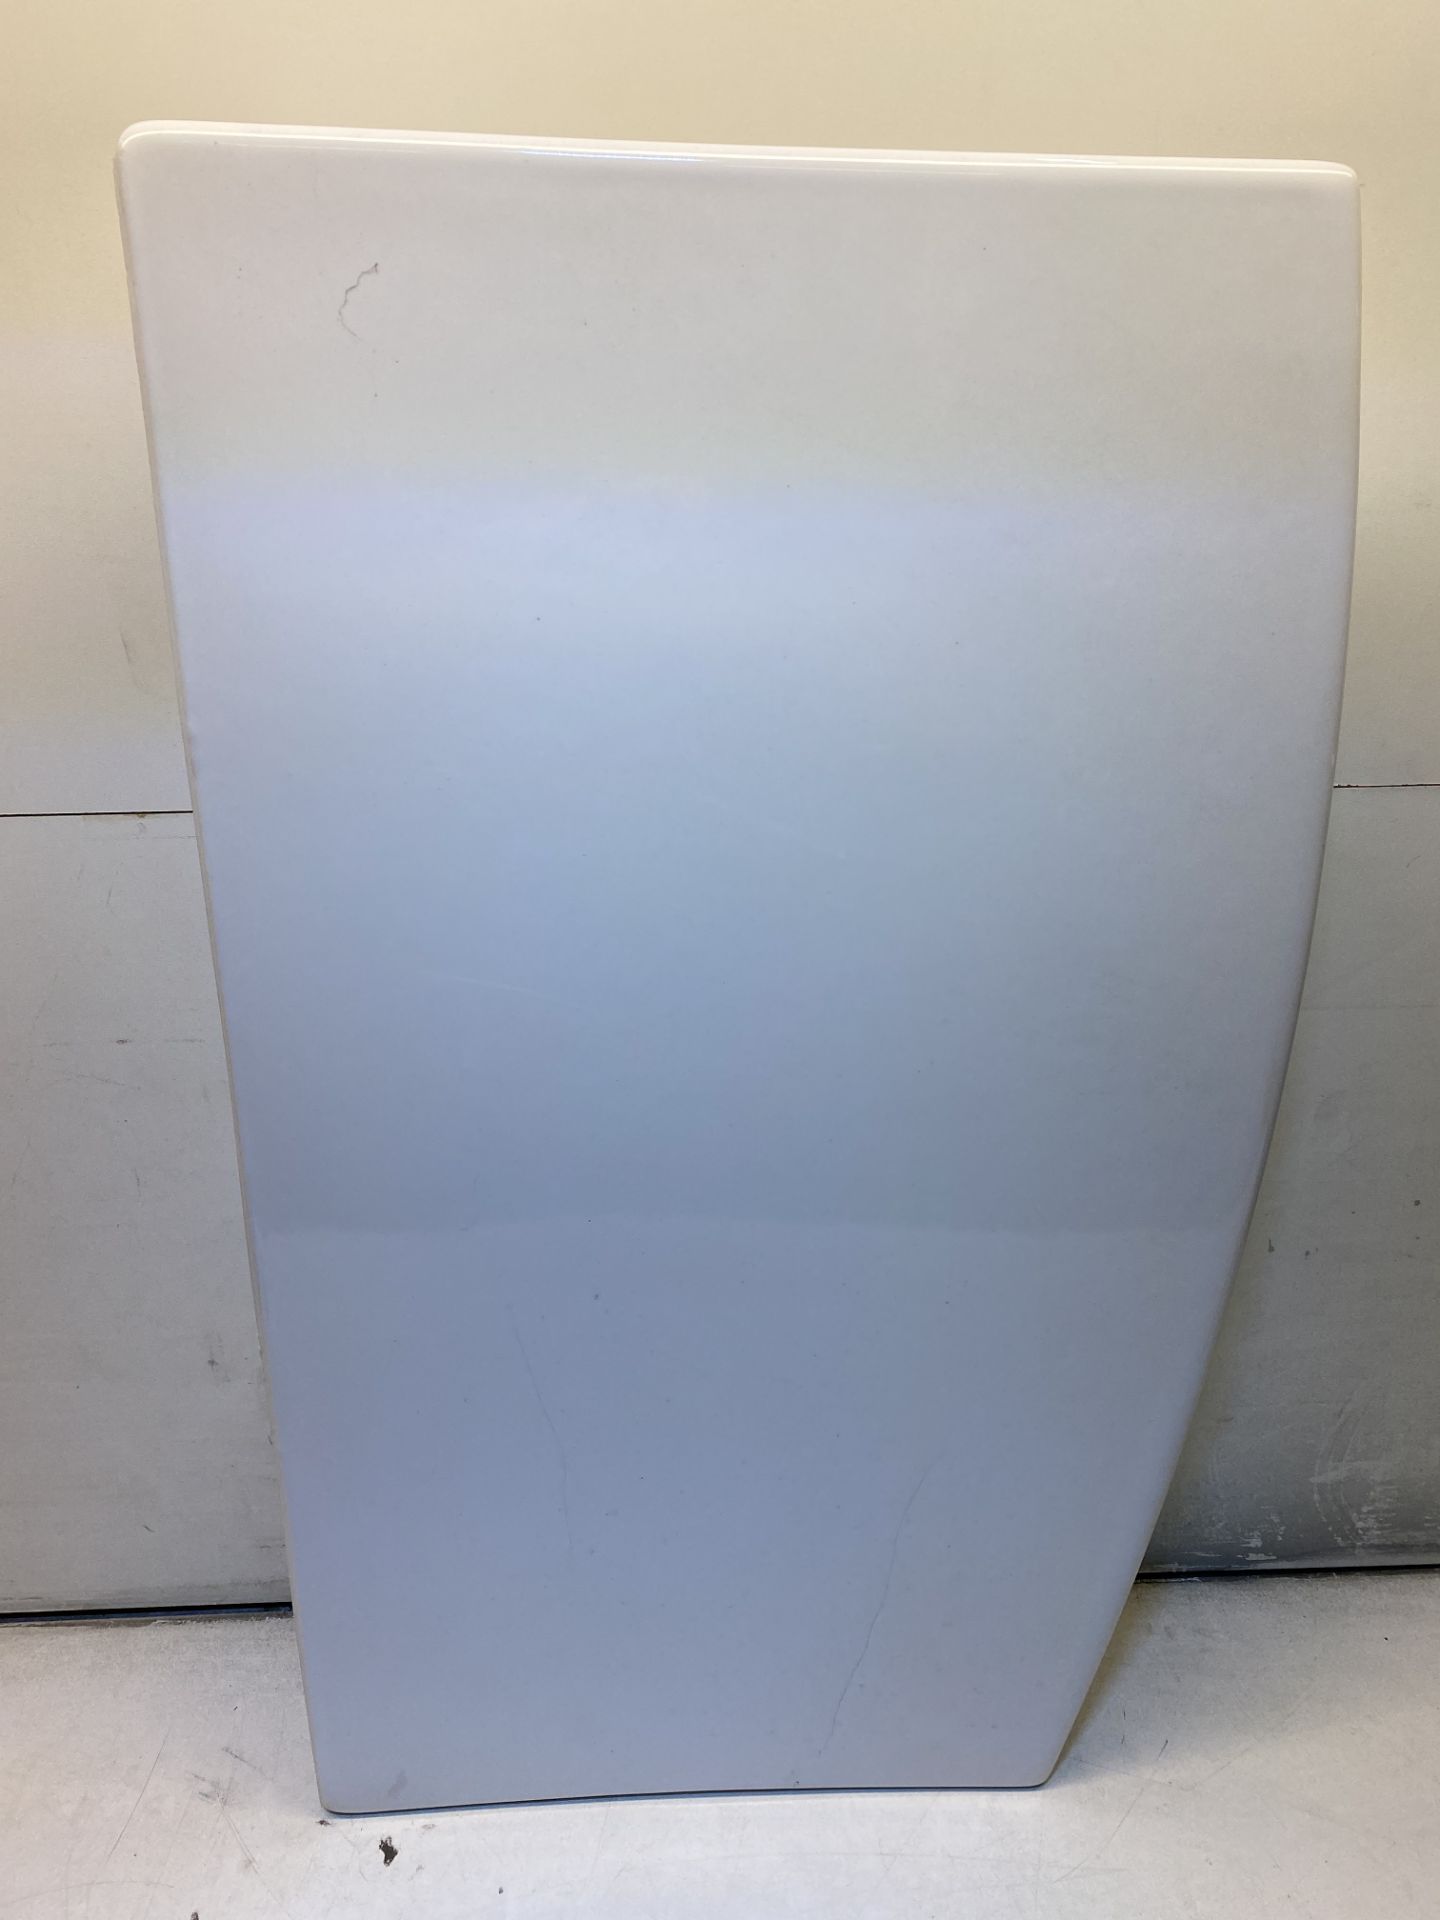 Twyford VC7051WH Ceramic Urinal Division with Fixing - White - Image 3 of 5